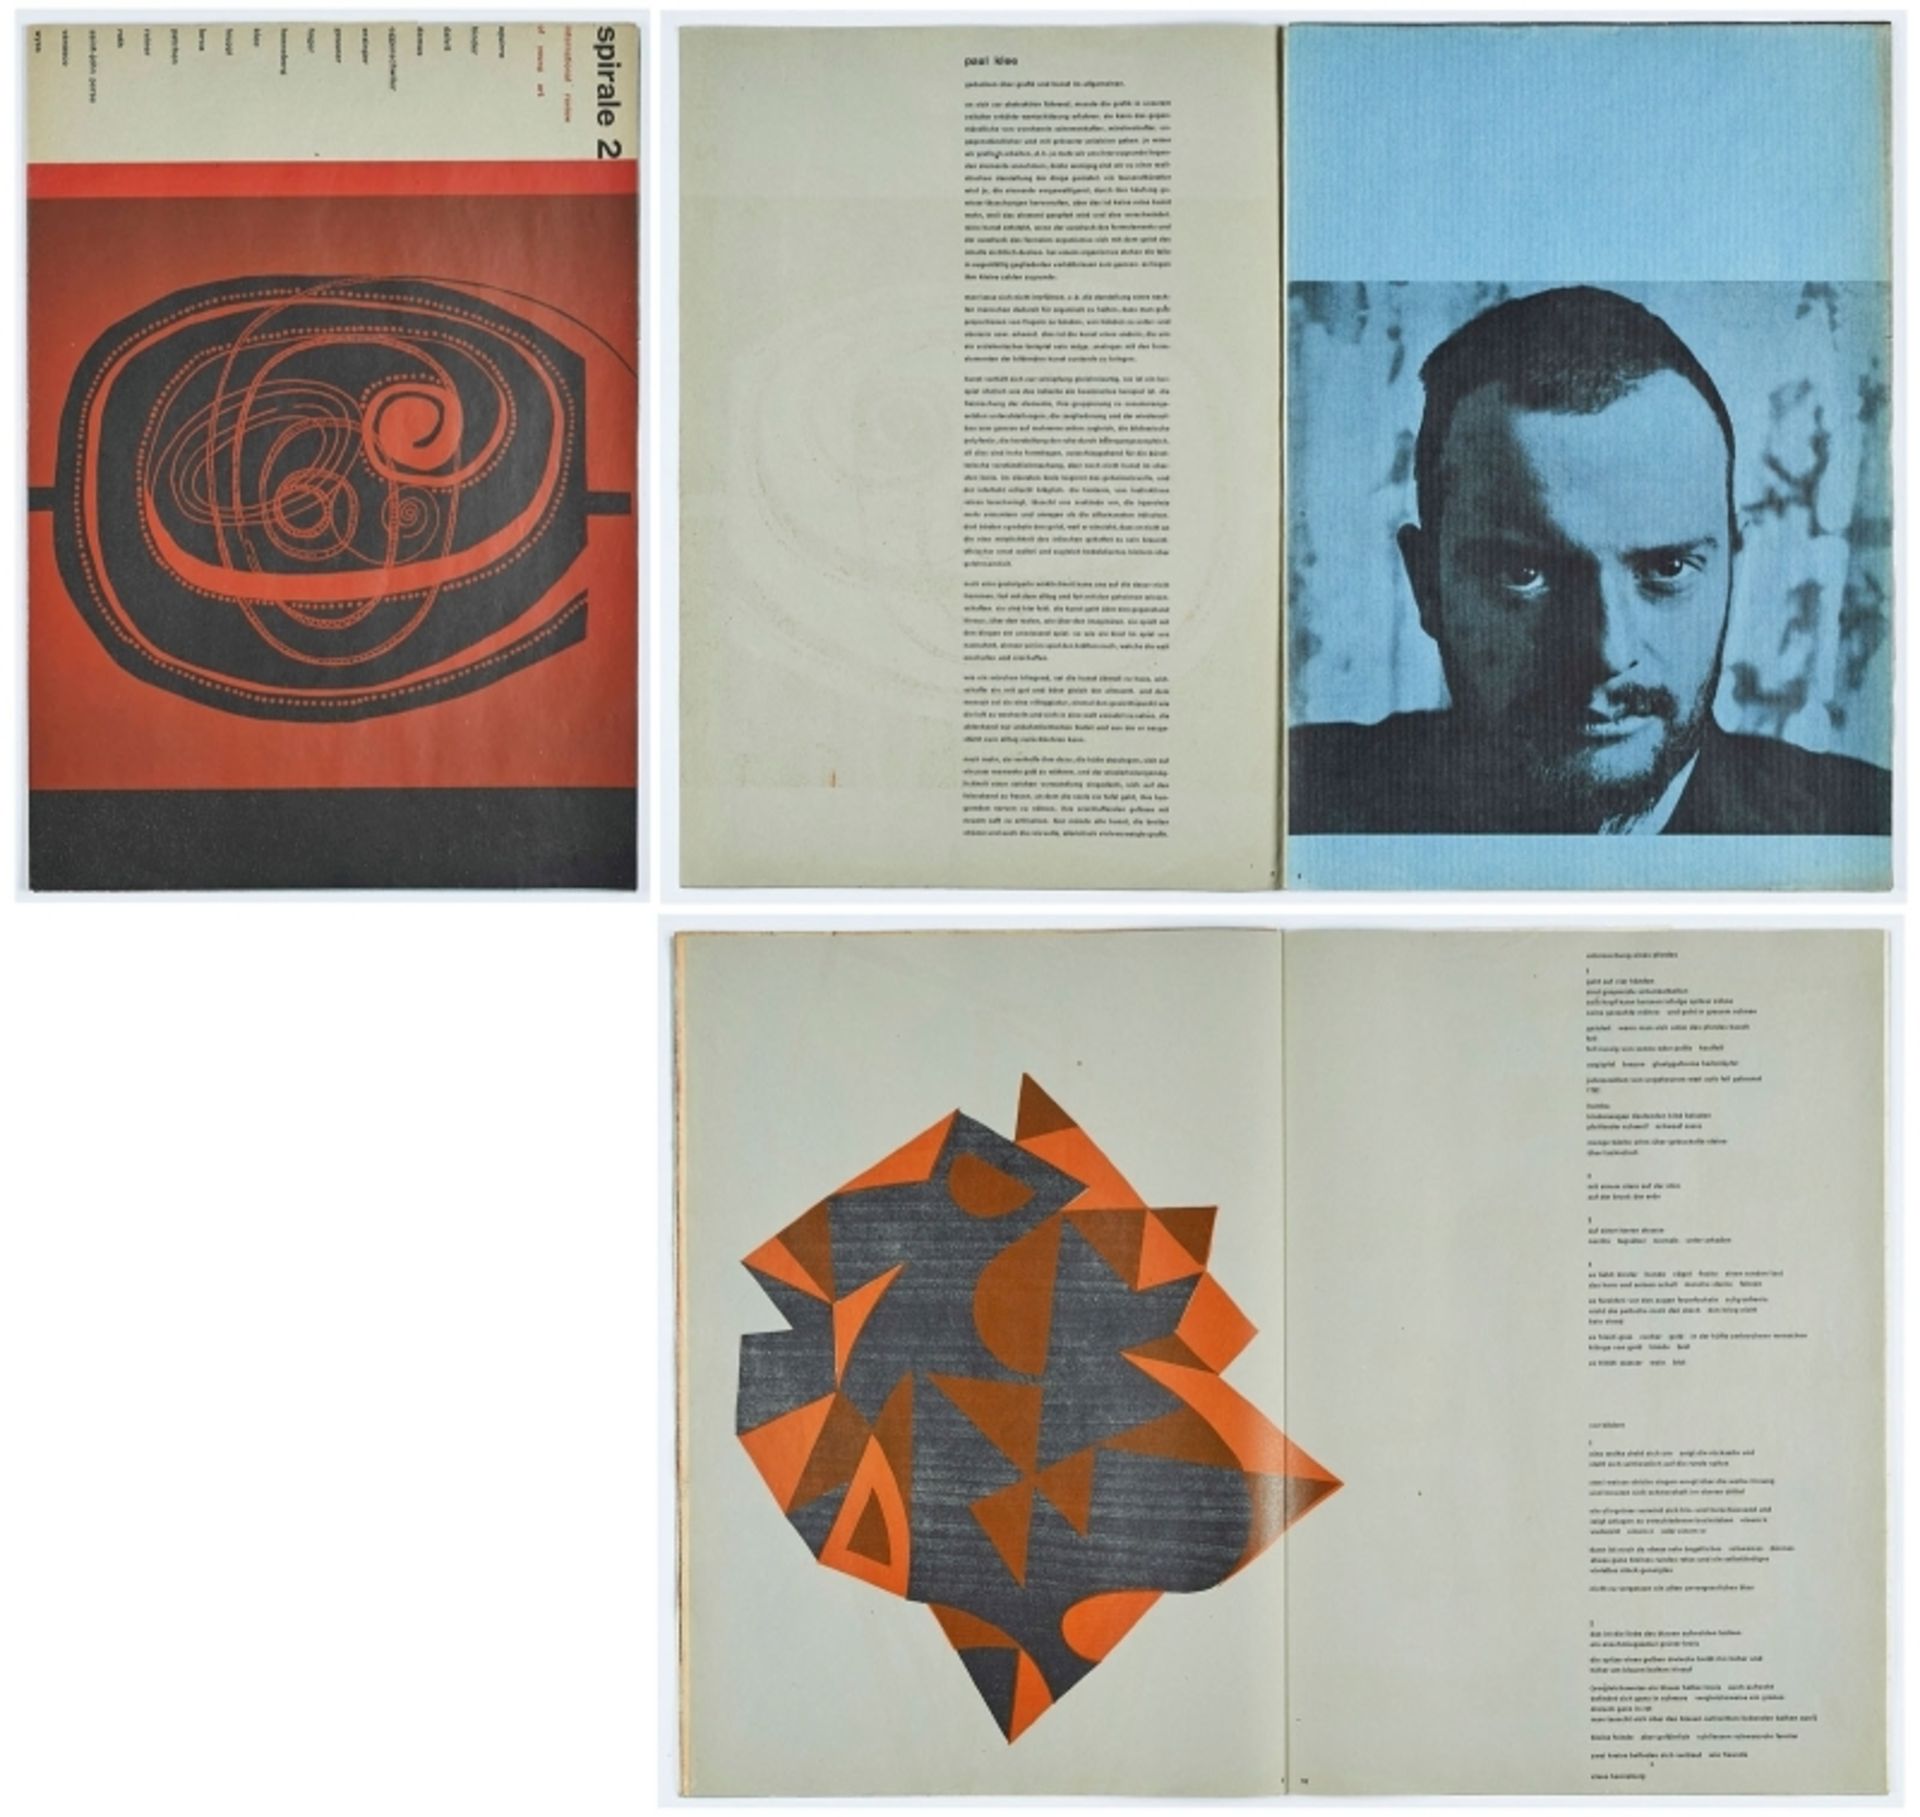 "spirale #2. International review of young art" 1953